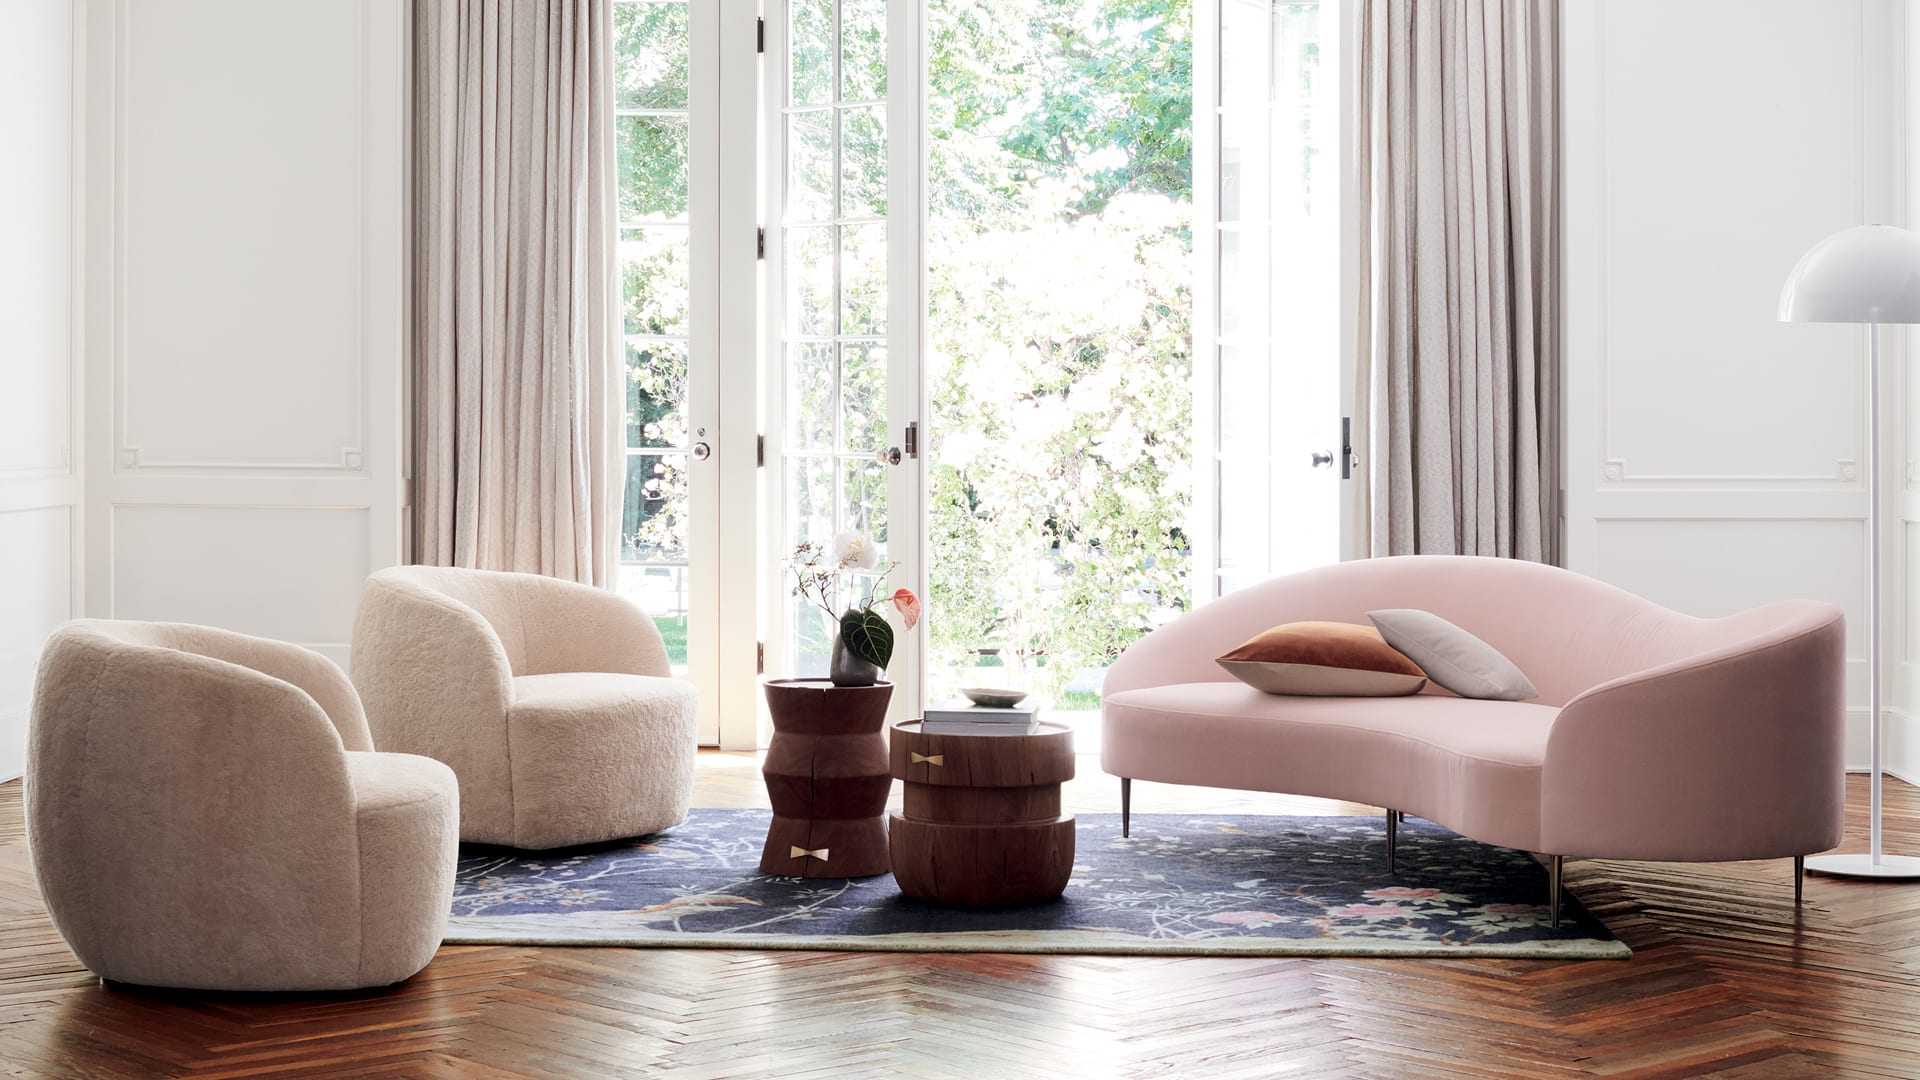 An exclusive first look at Goop’s debut furniture collection